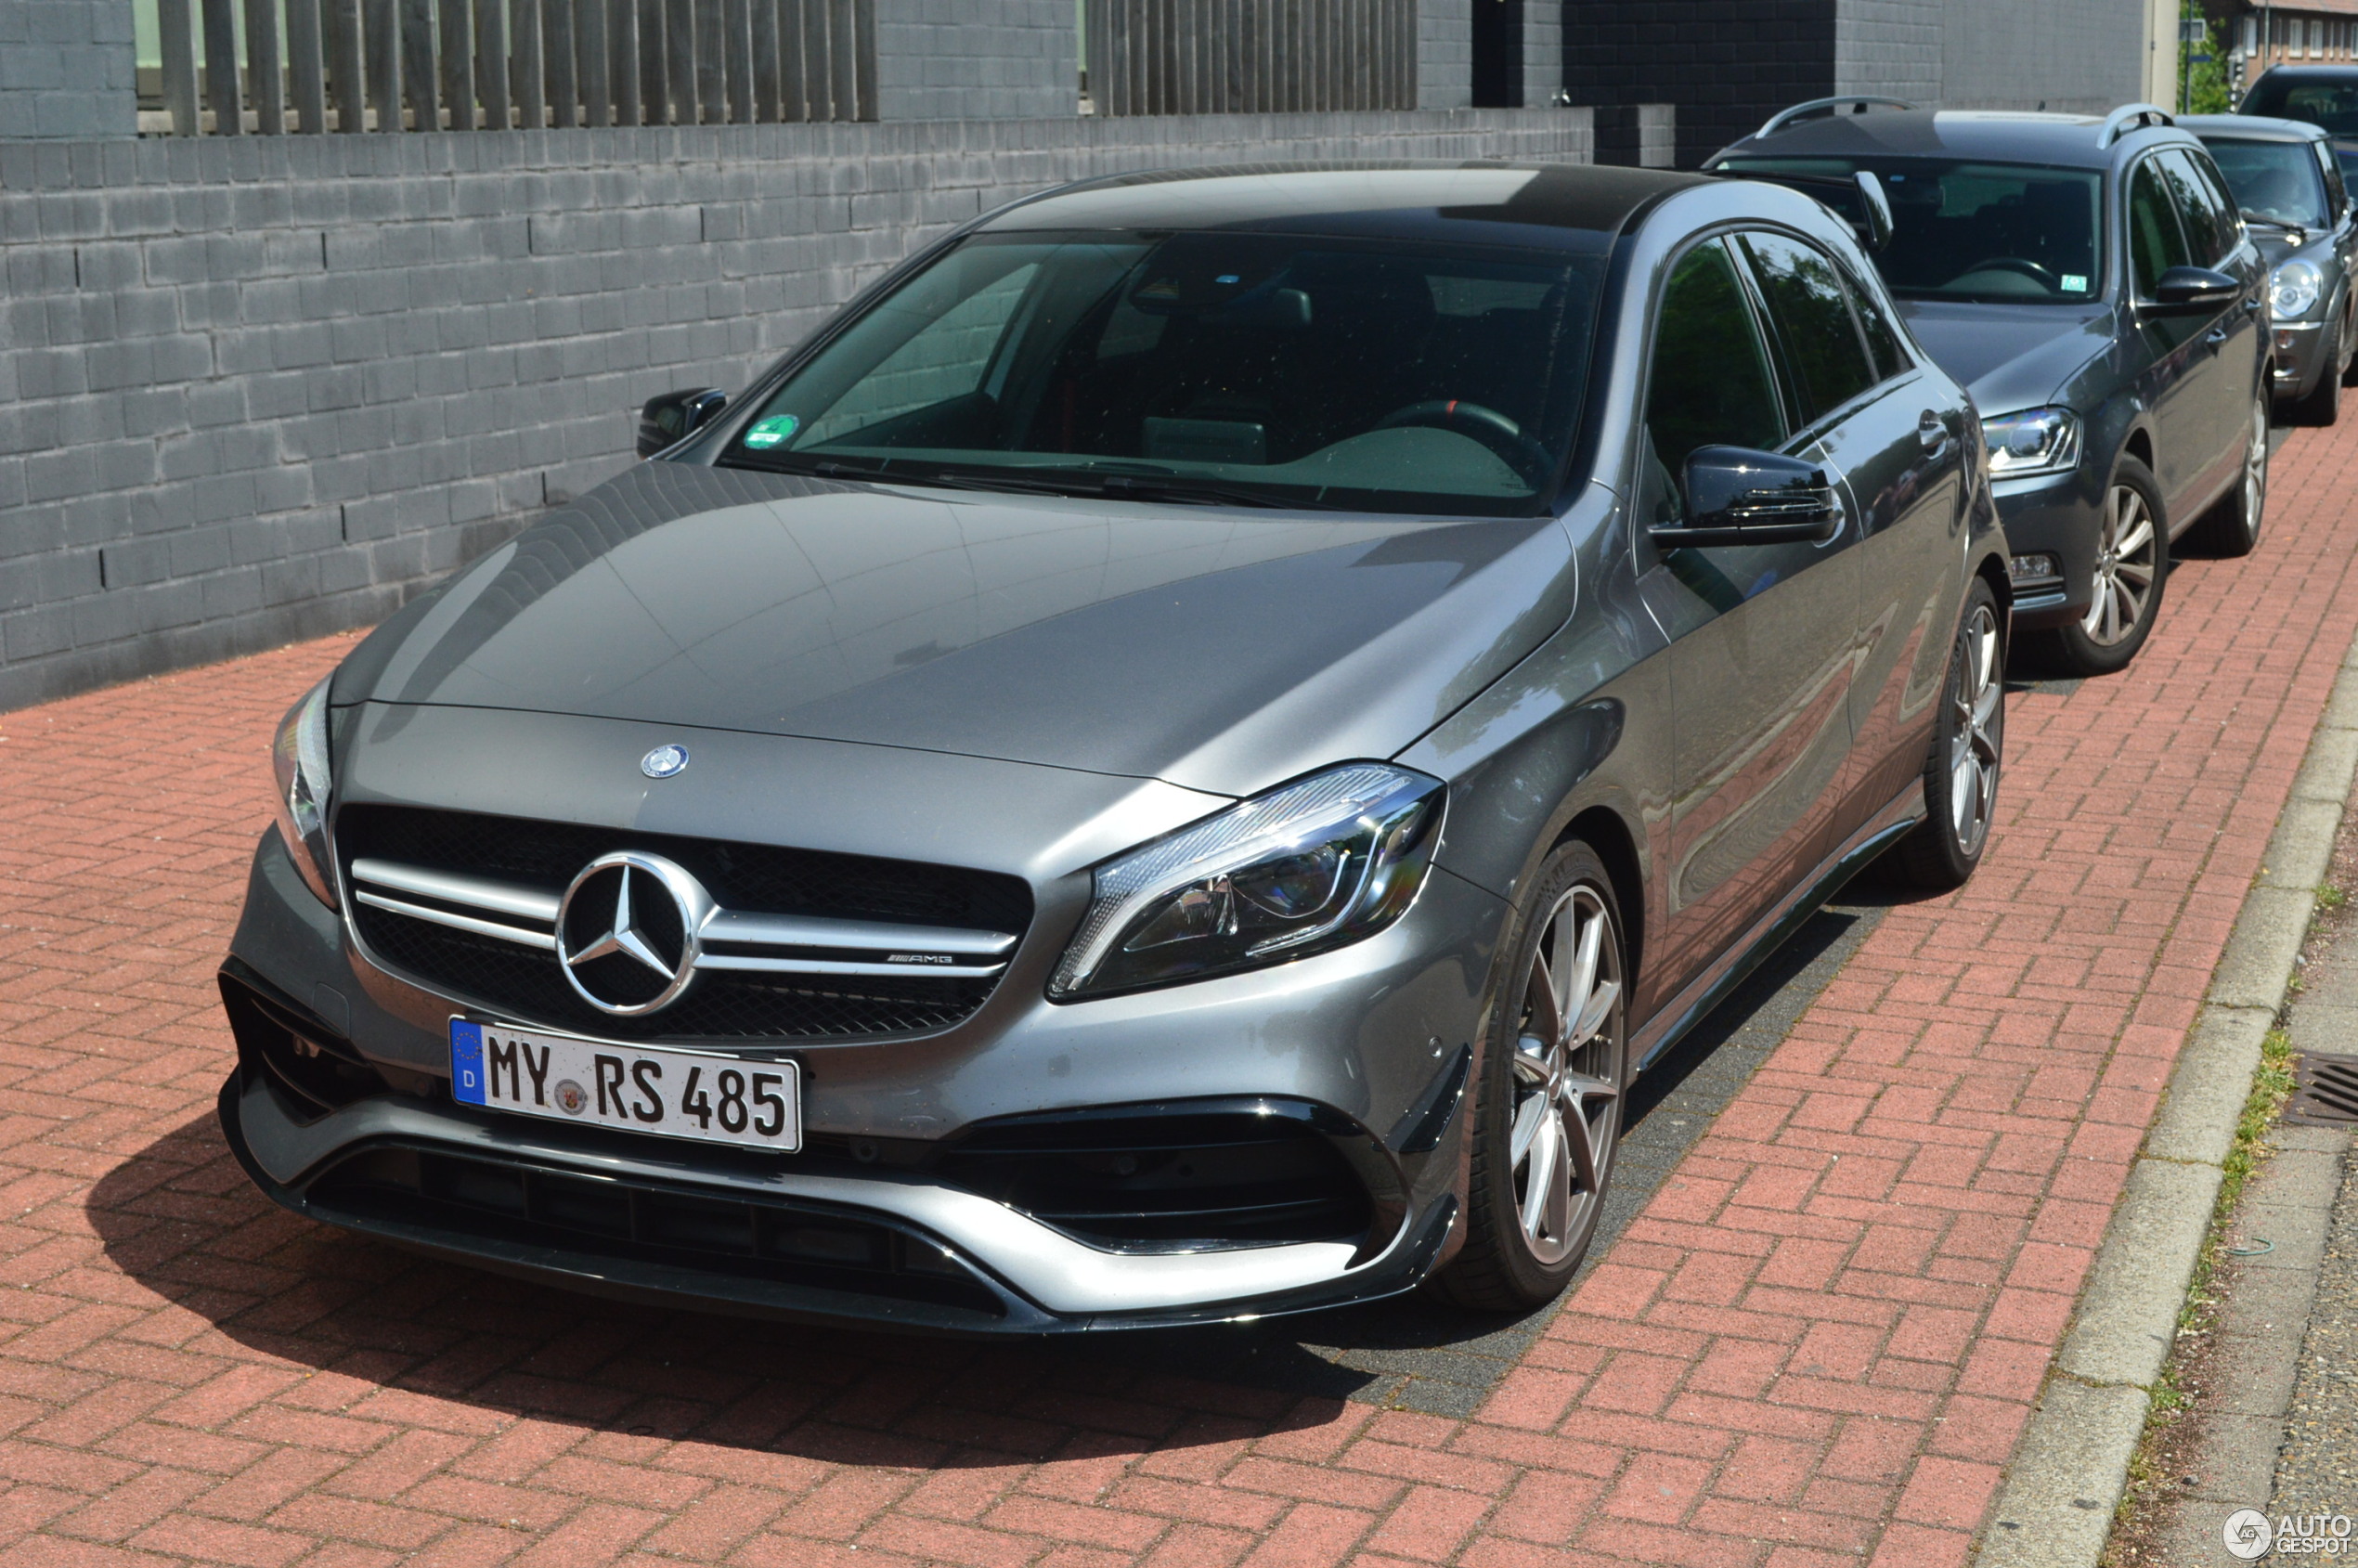 Mercedes-AMG A 45 W176 2015 Posaidon RS485+